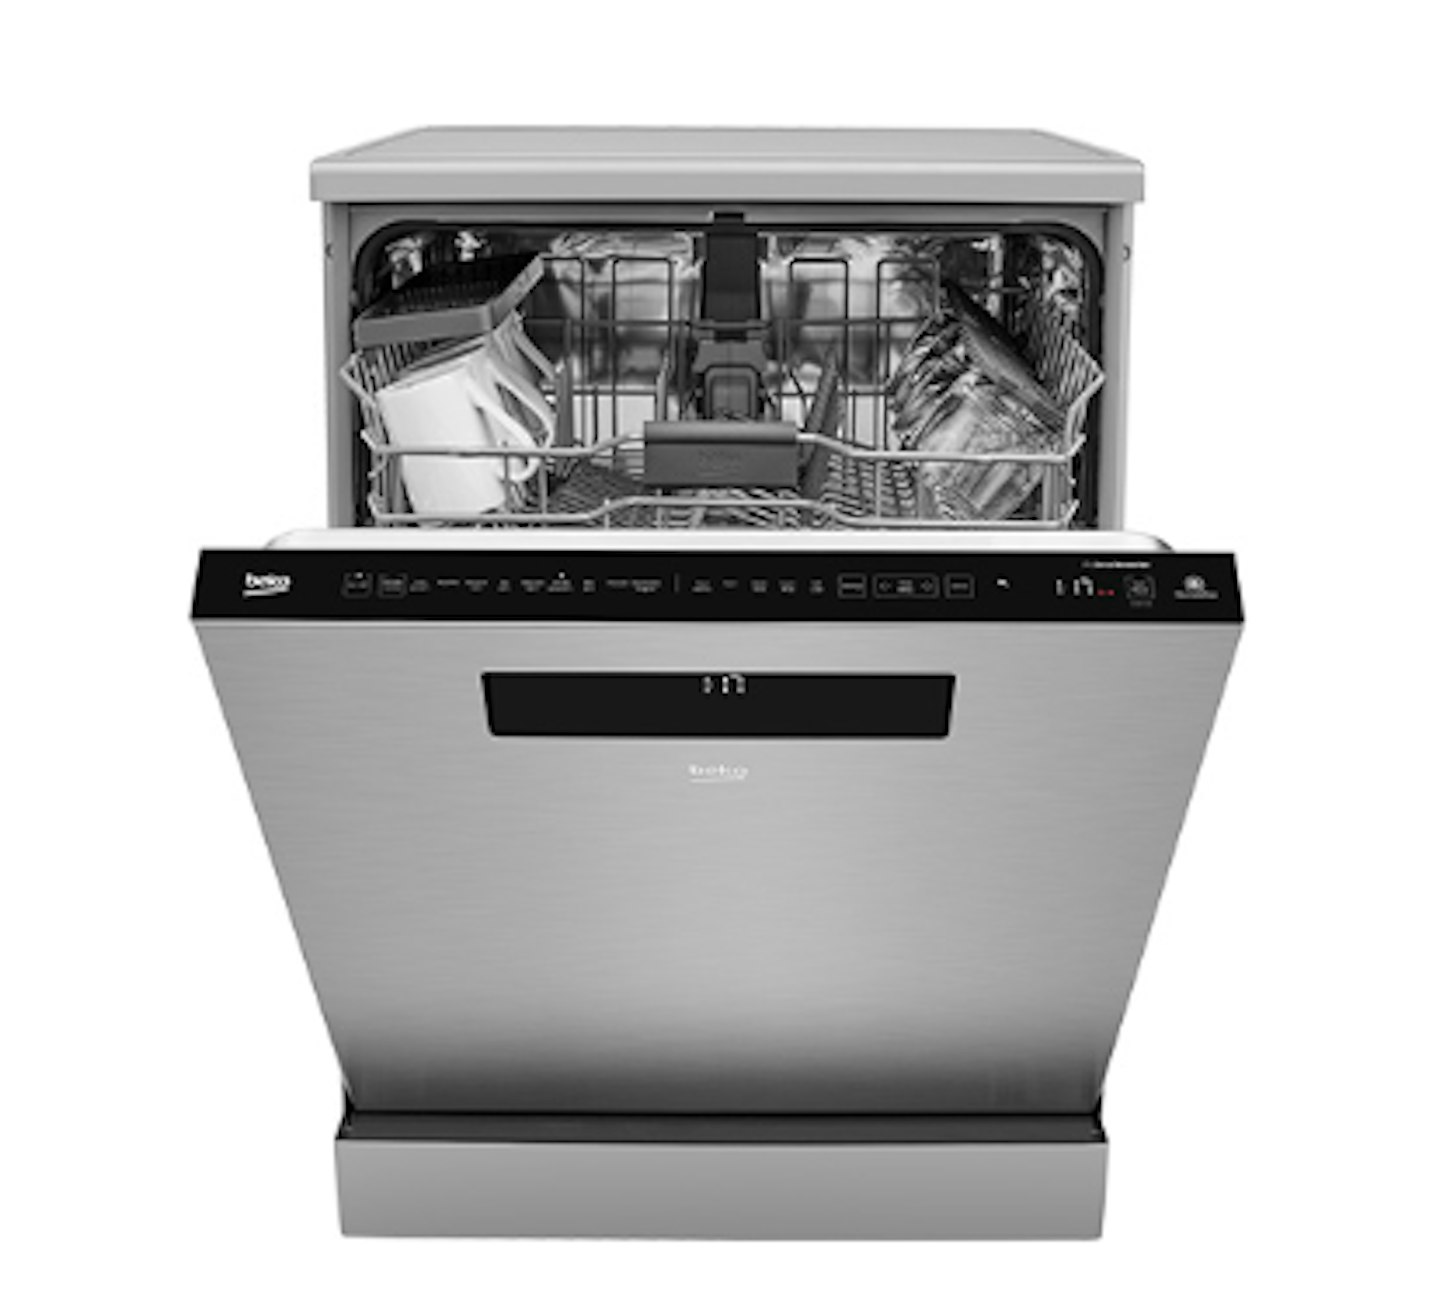 Autodose Connected Dishwasher